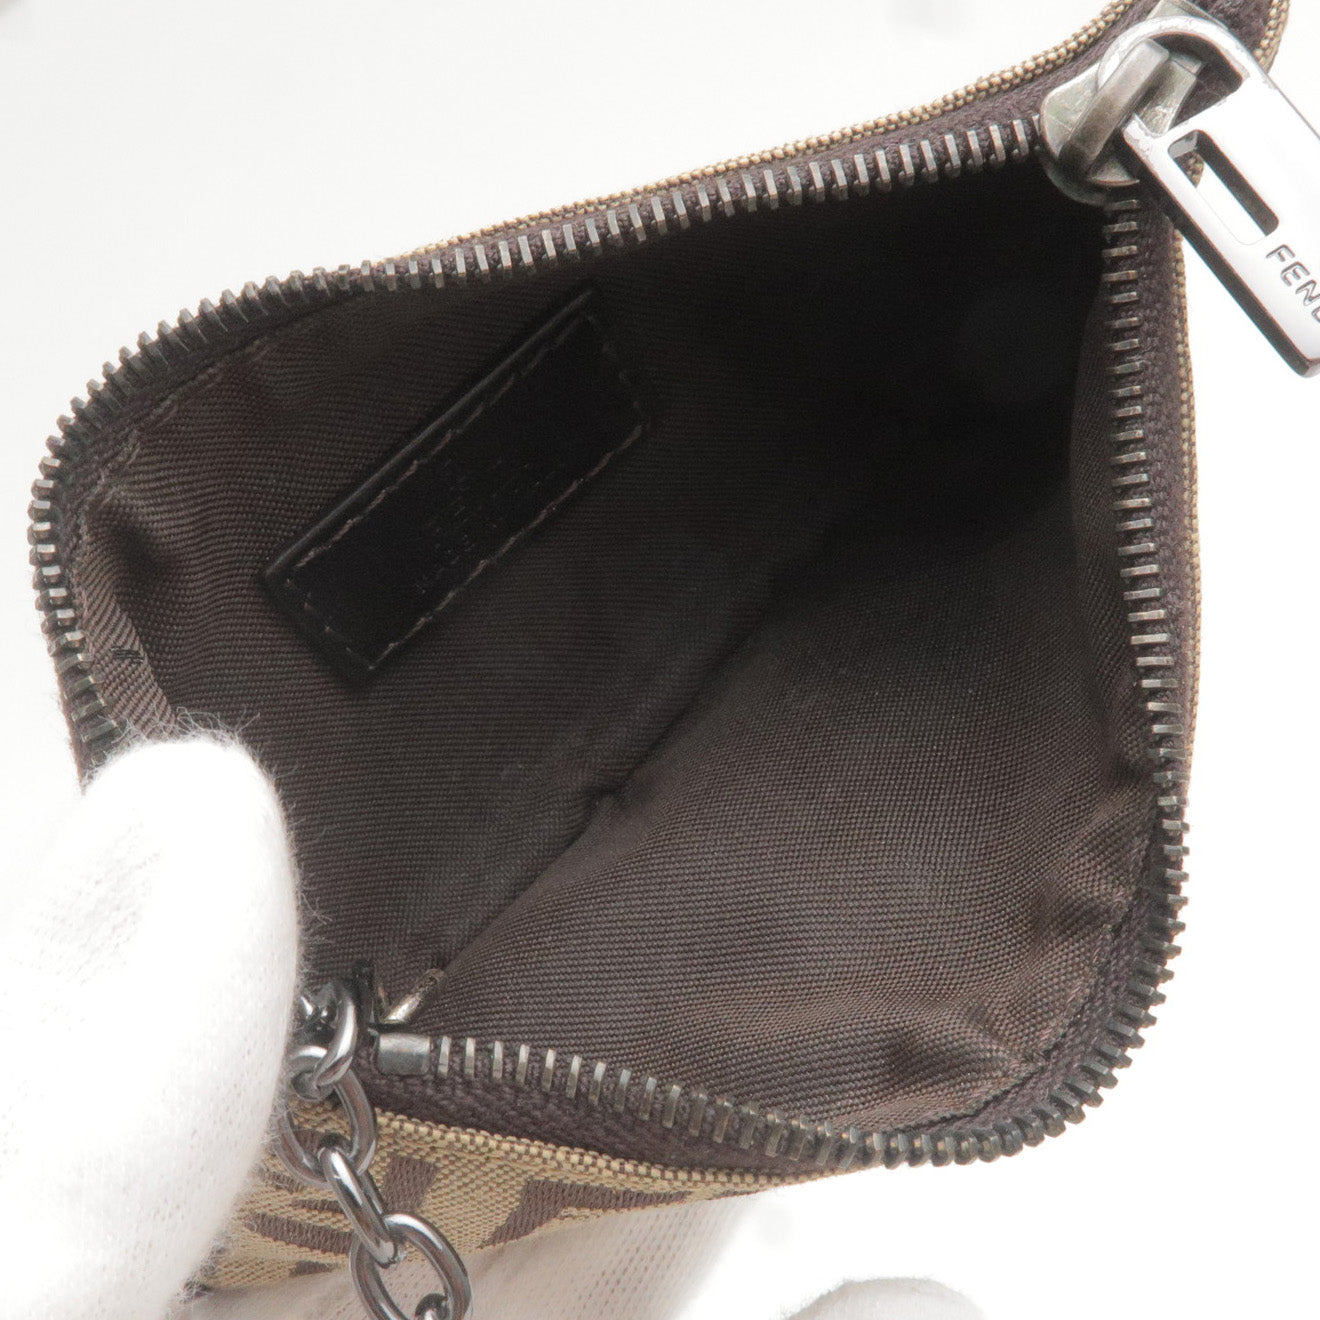 Coin Purse | Buy Coin Purse Online Australia - THE ICONIC